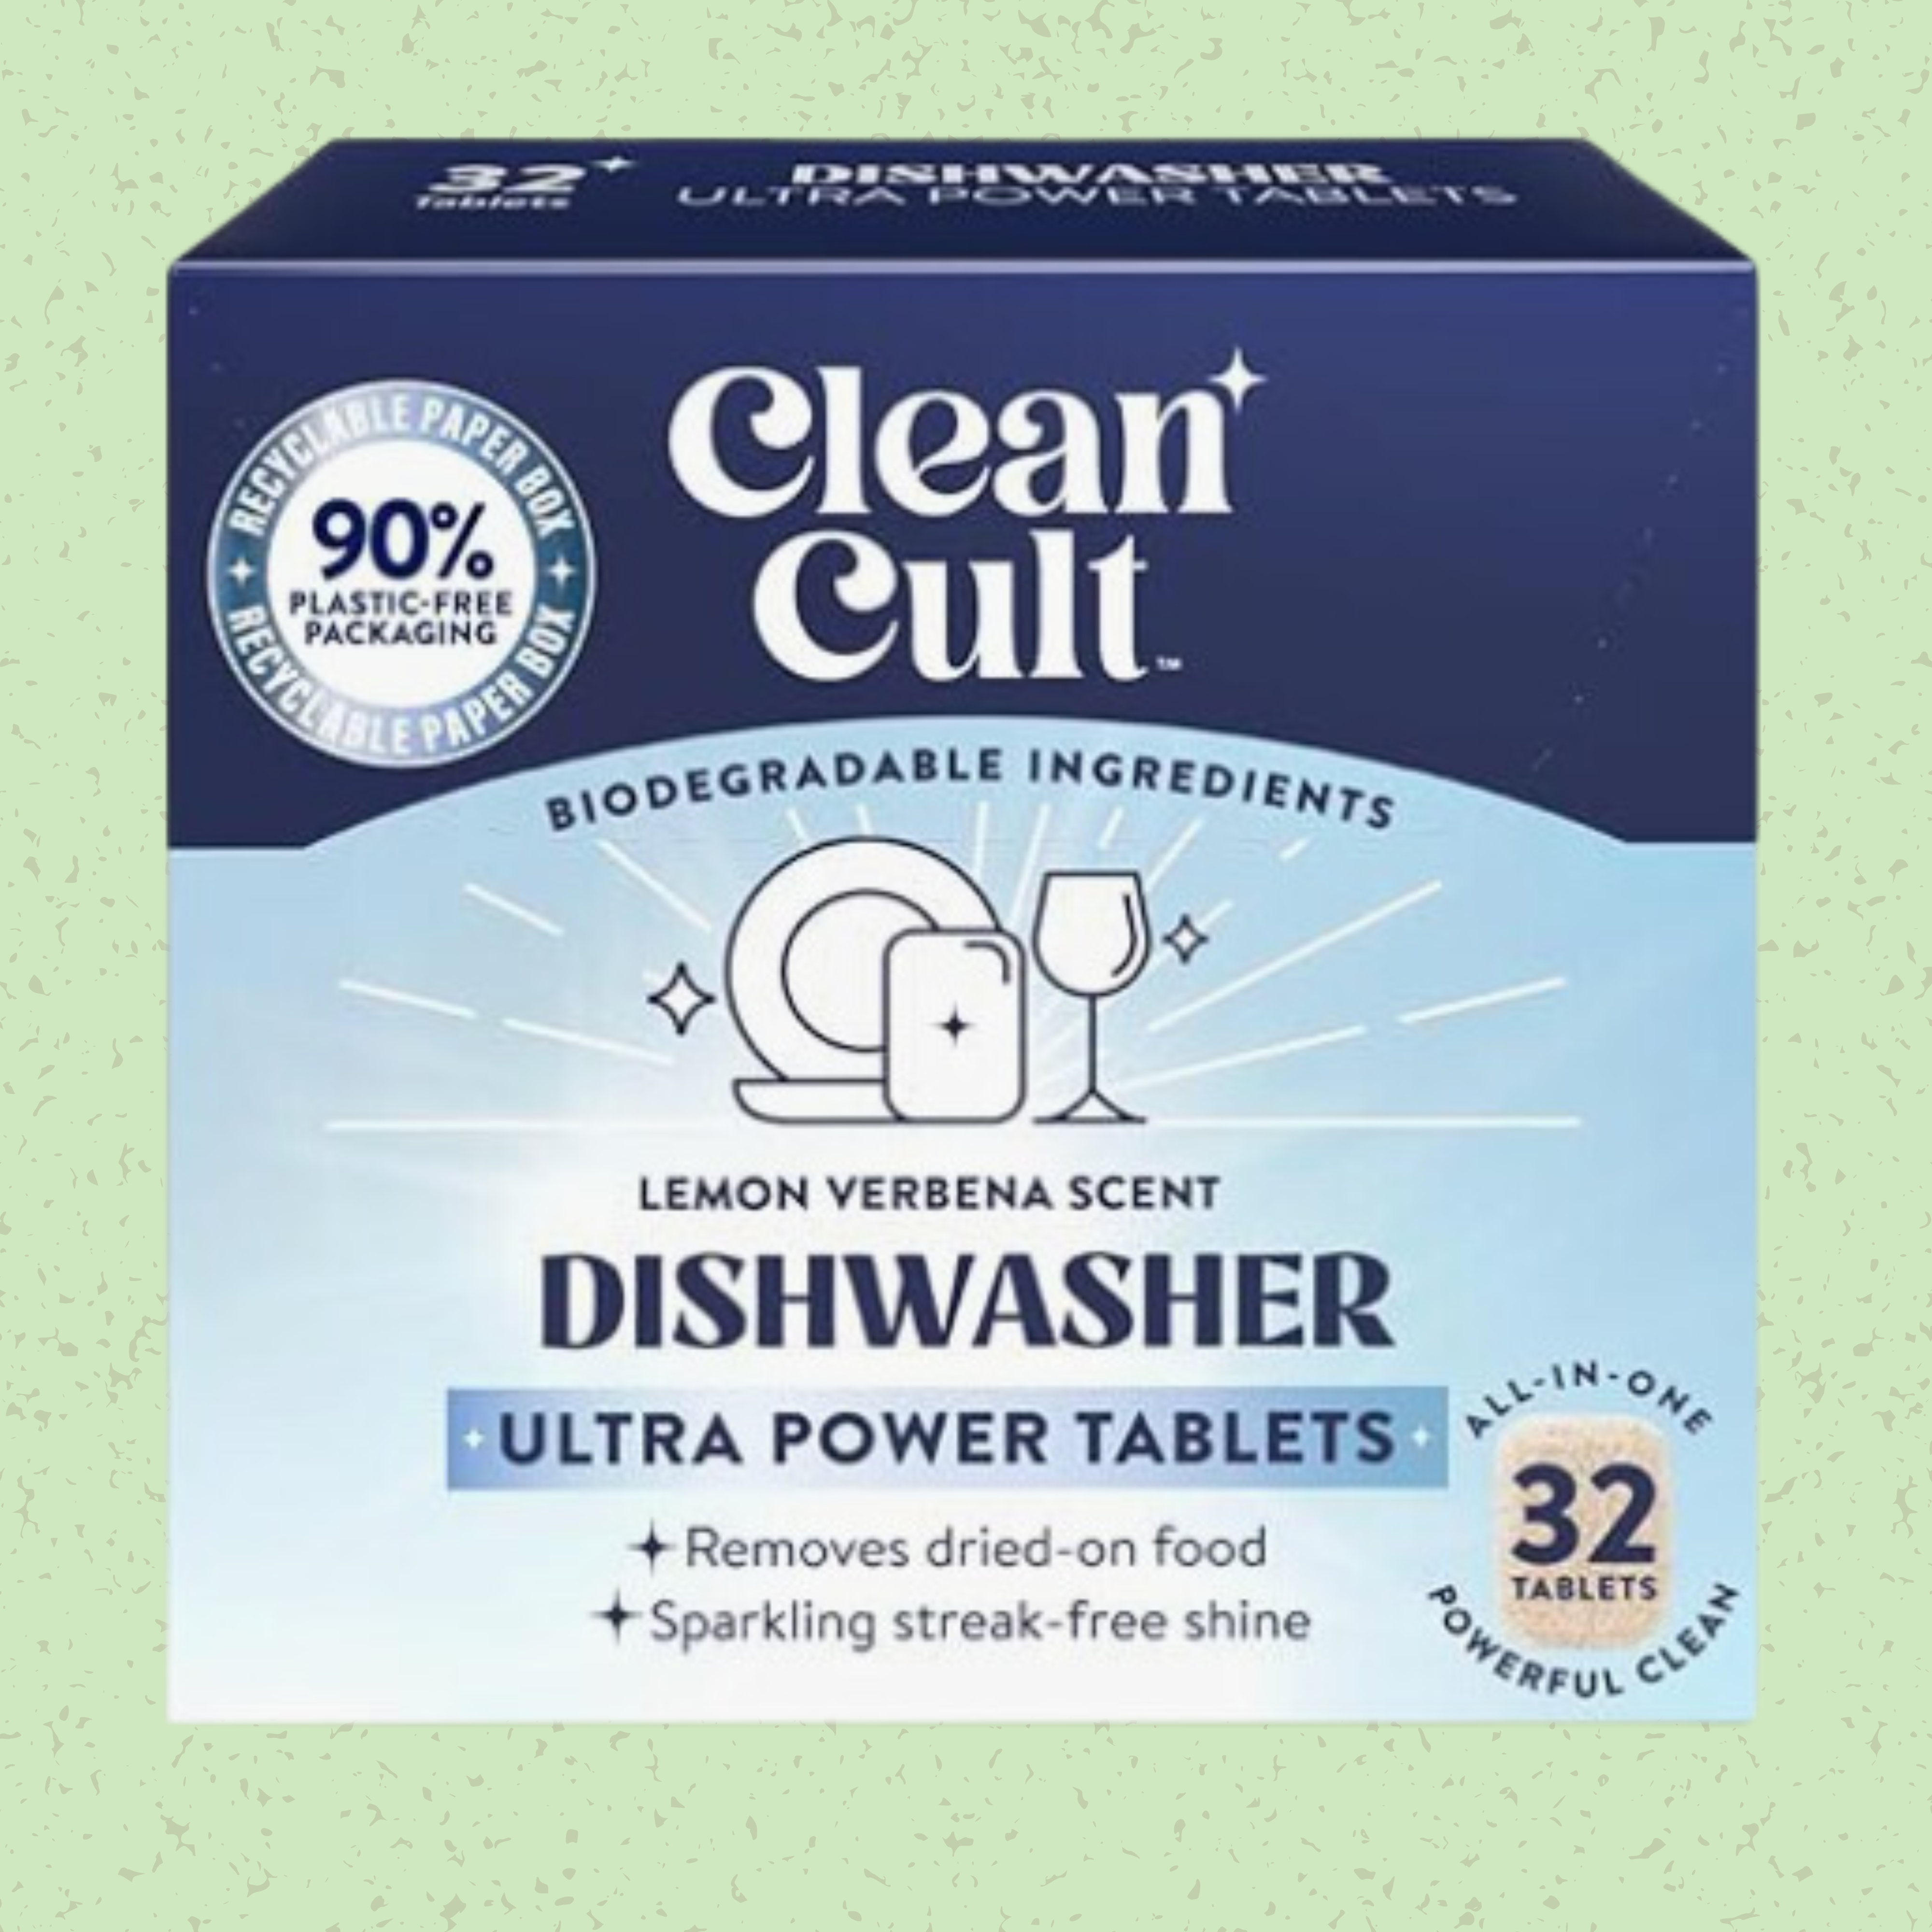 Cleancult: 8 Of The Best Zero Waste Dishwasher Detergent Options You Need to Try Now